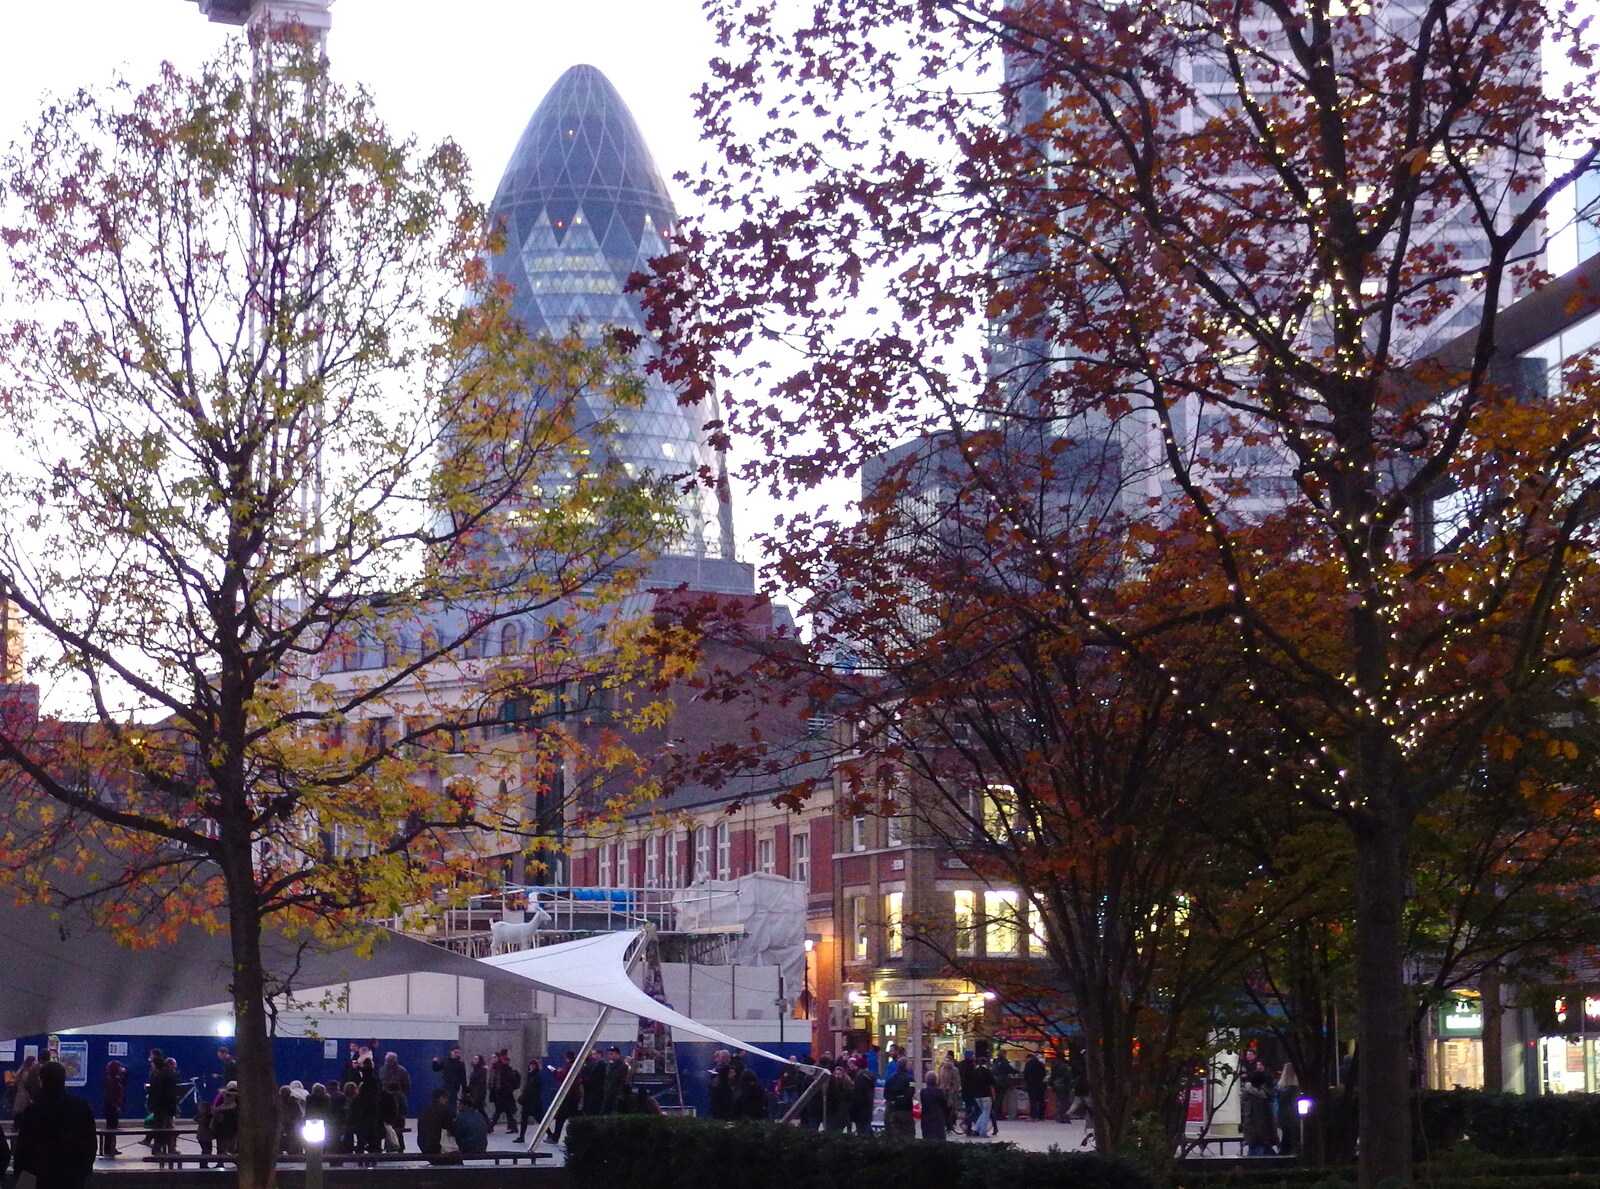 Spitalfields and the Gherkin from Lunch in the East End, Spitalfields and Brick Lane, London - 1st December 2013